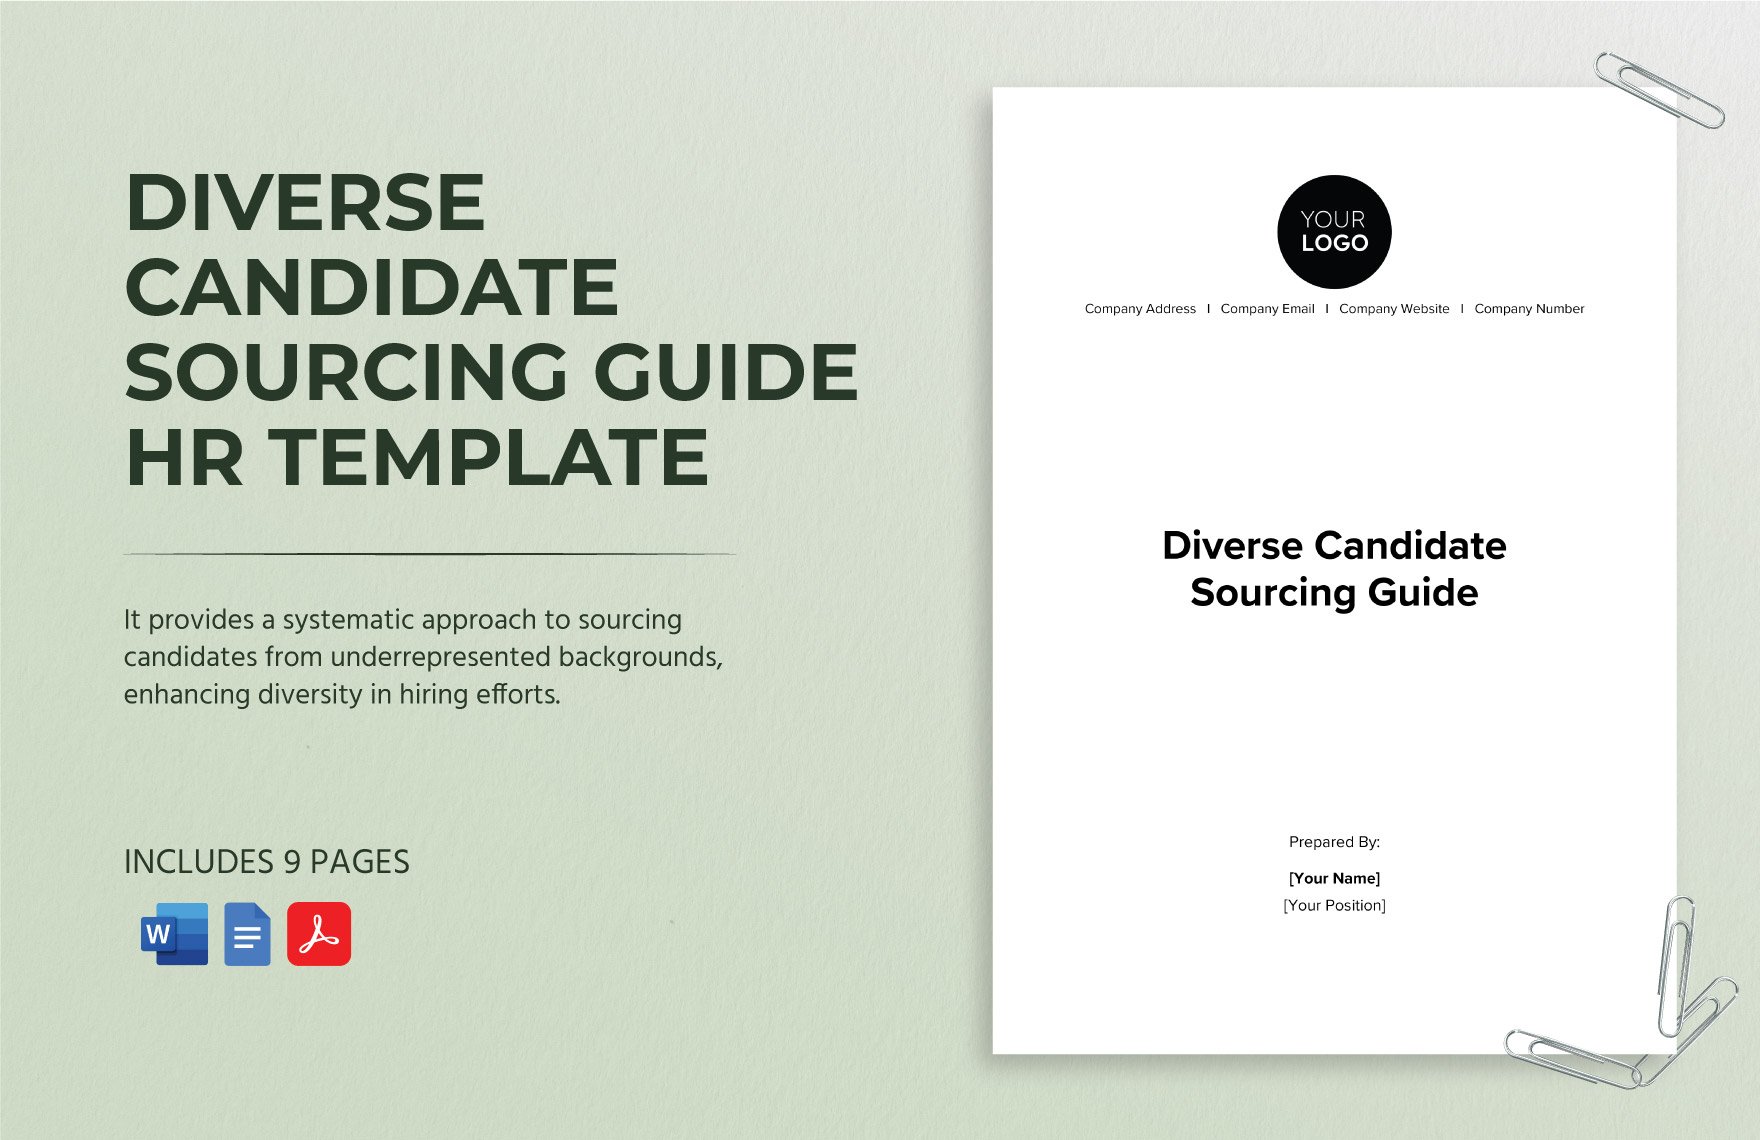 Diverse Candidate Sourcing Guide HR Template in Word, Google Docs, PDF